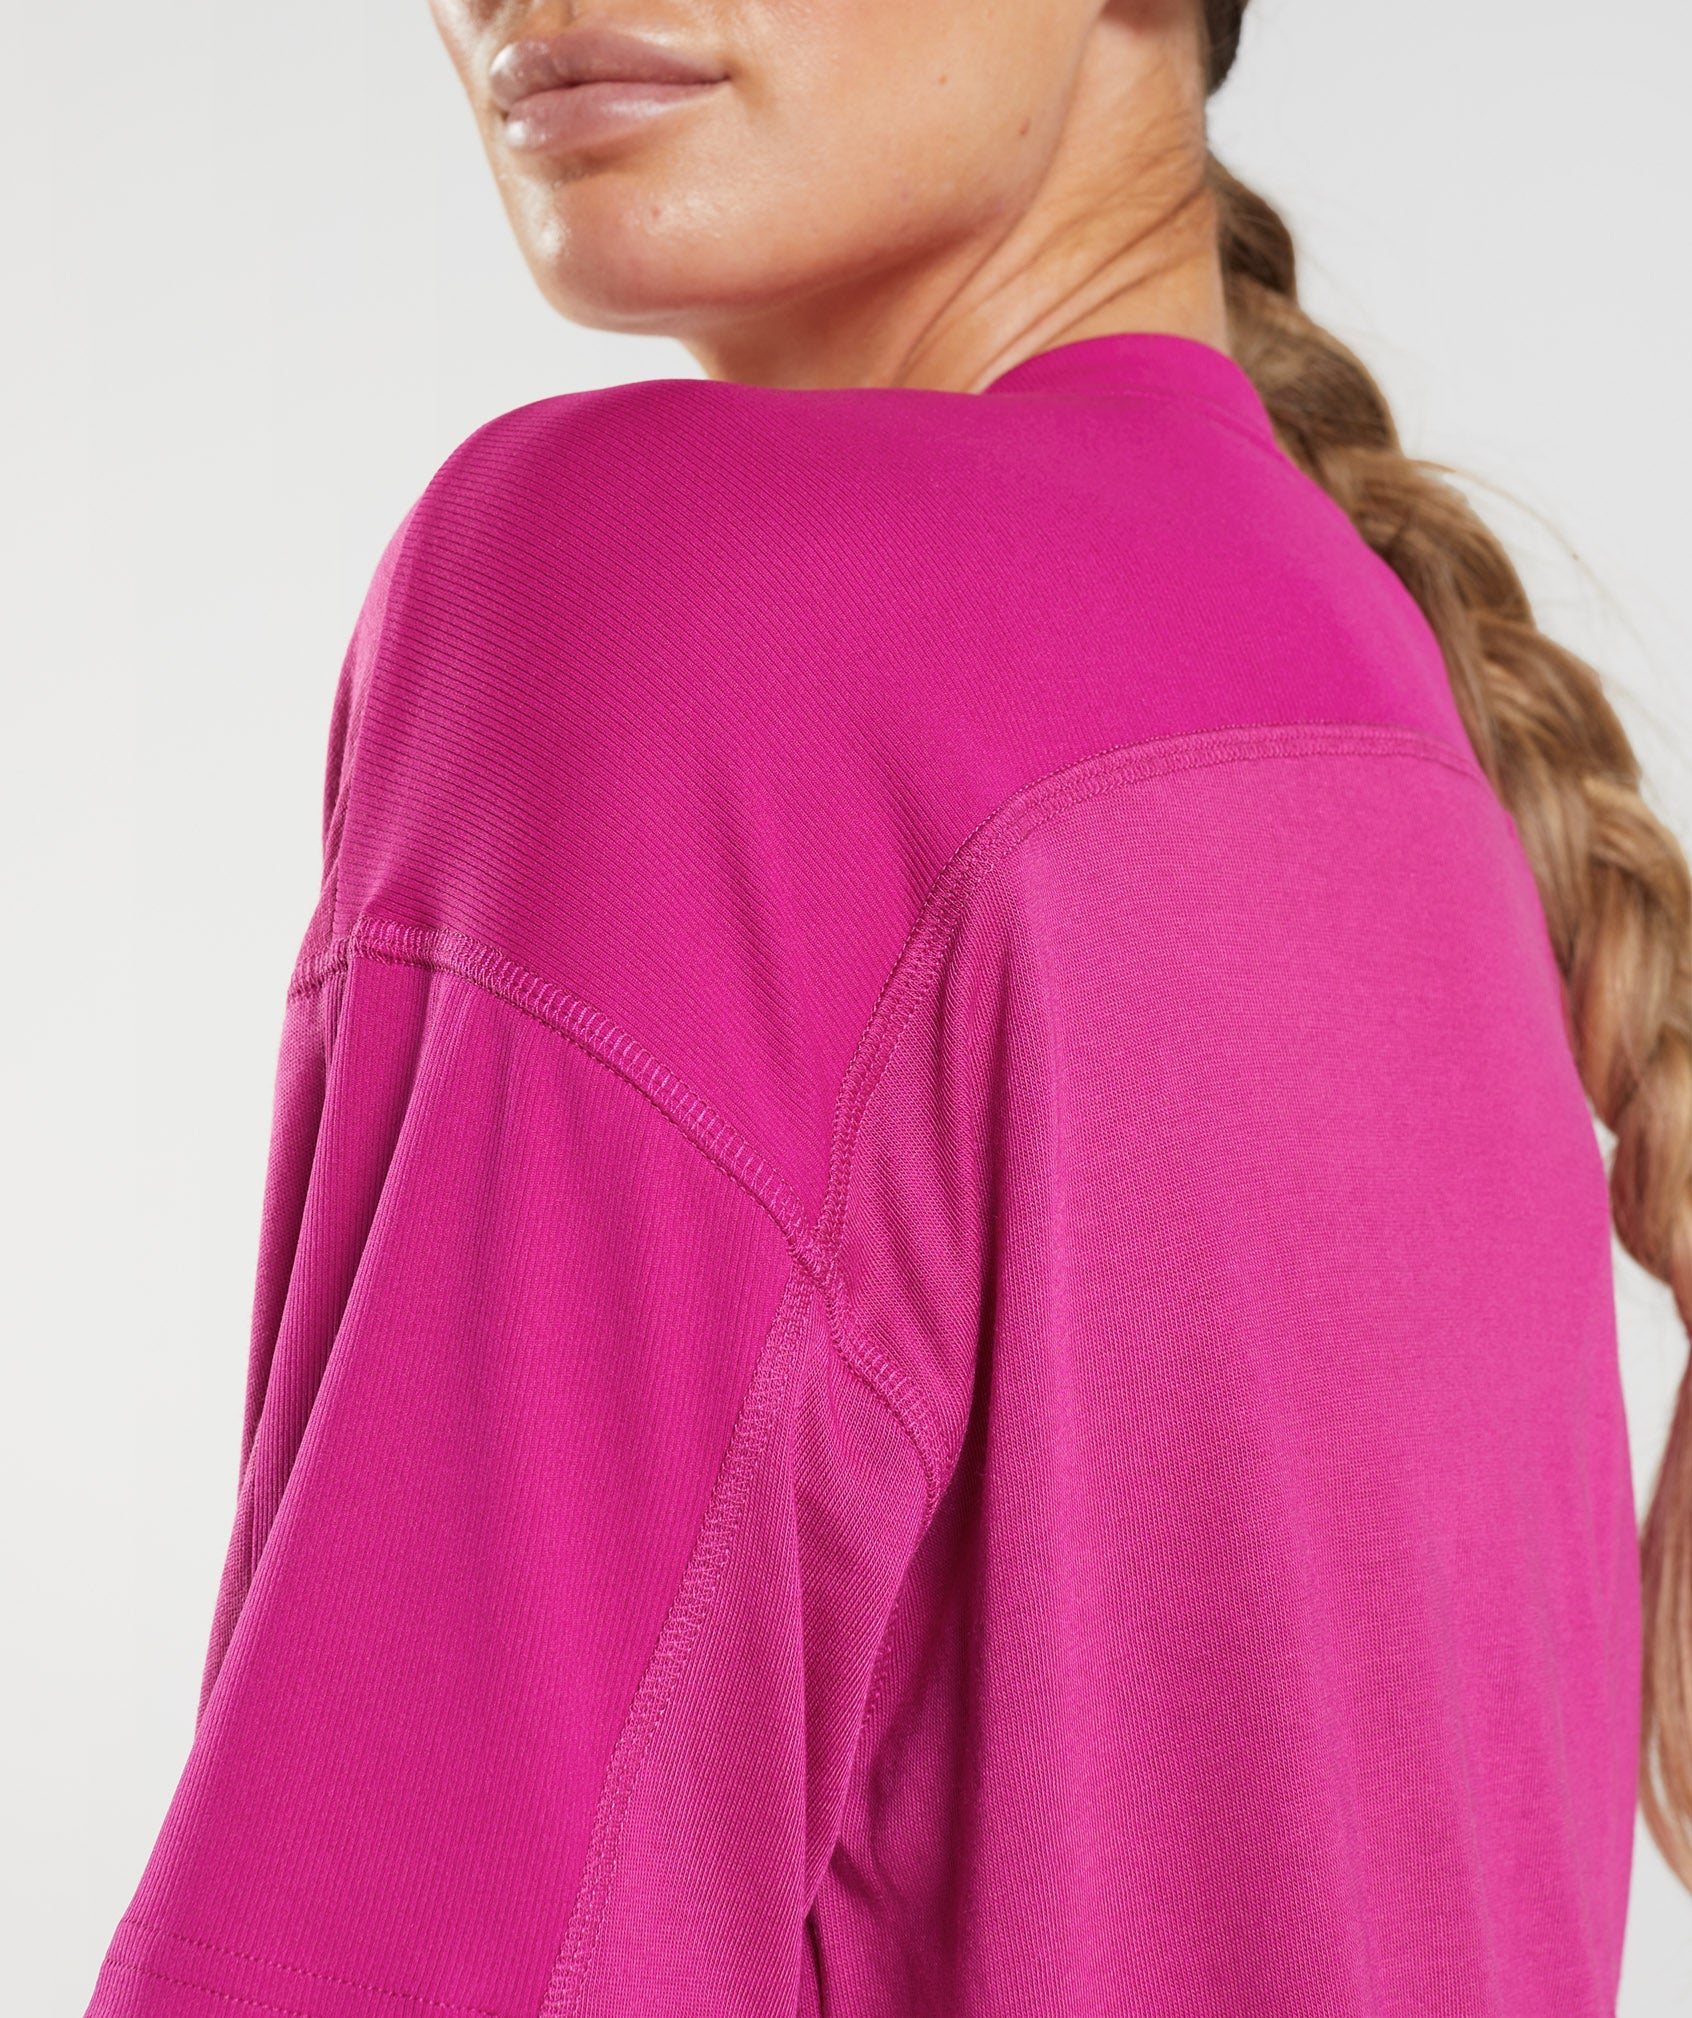 GS Power Midi Top in Magenta Pink - view 6